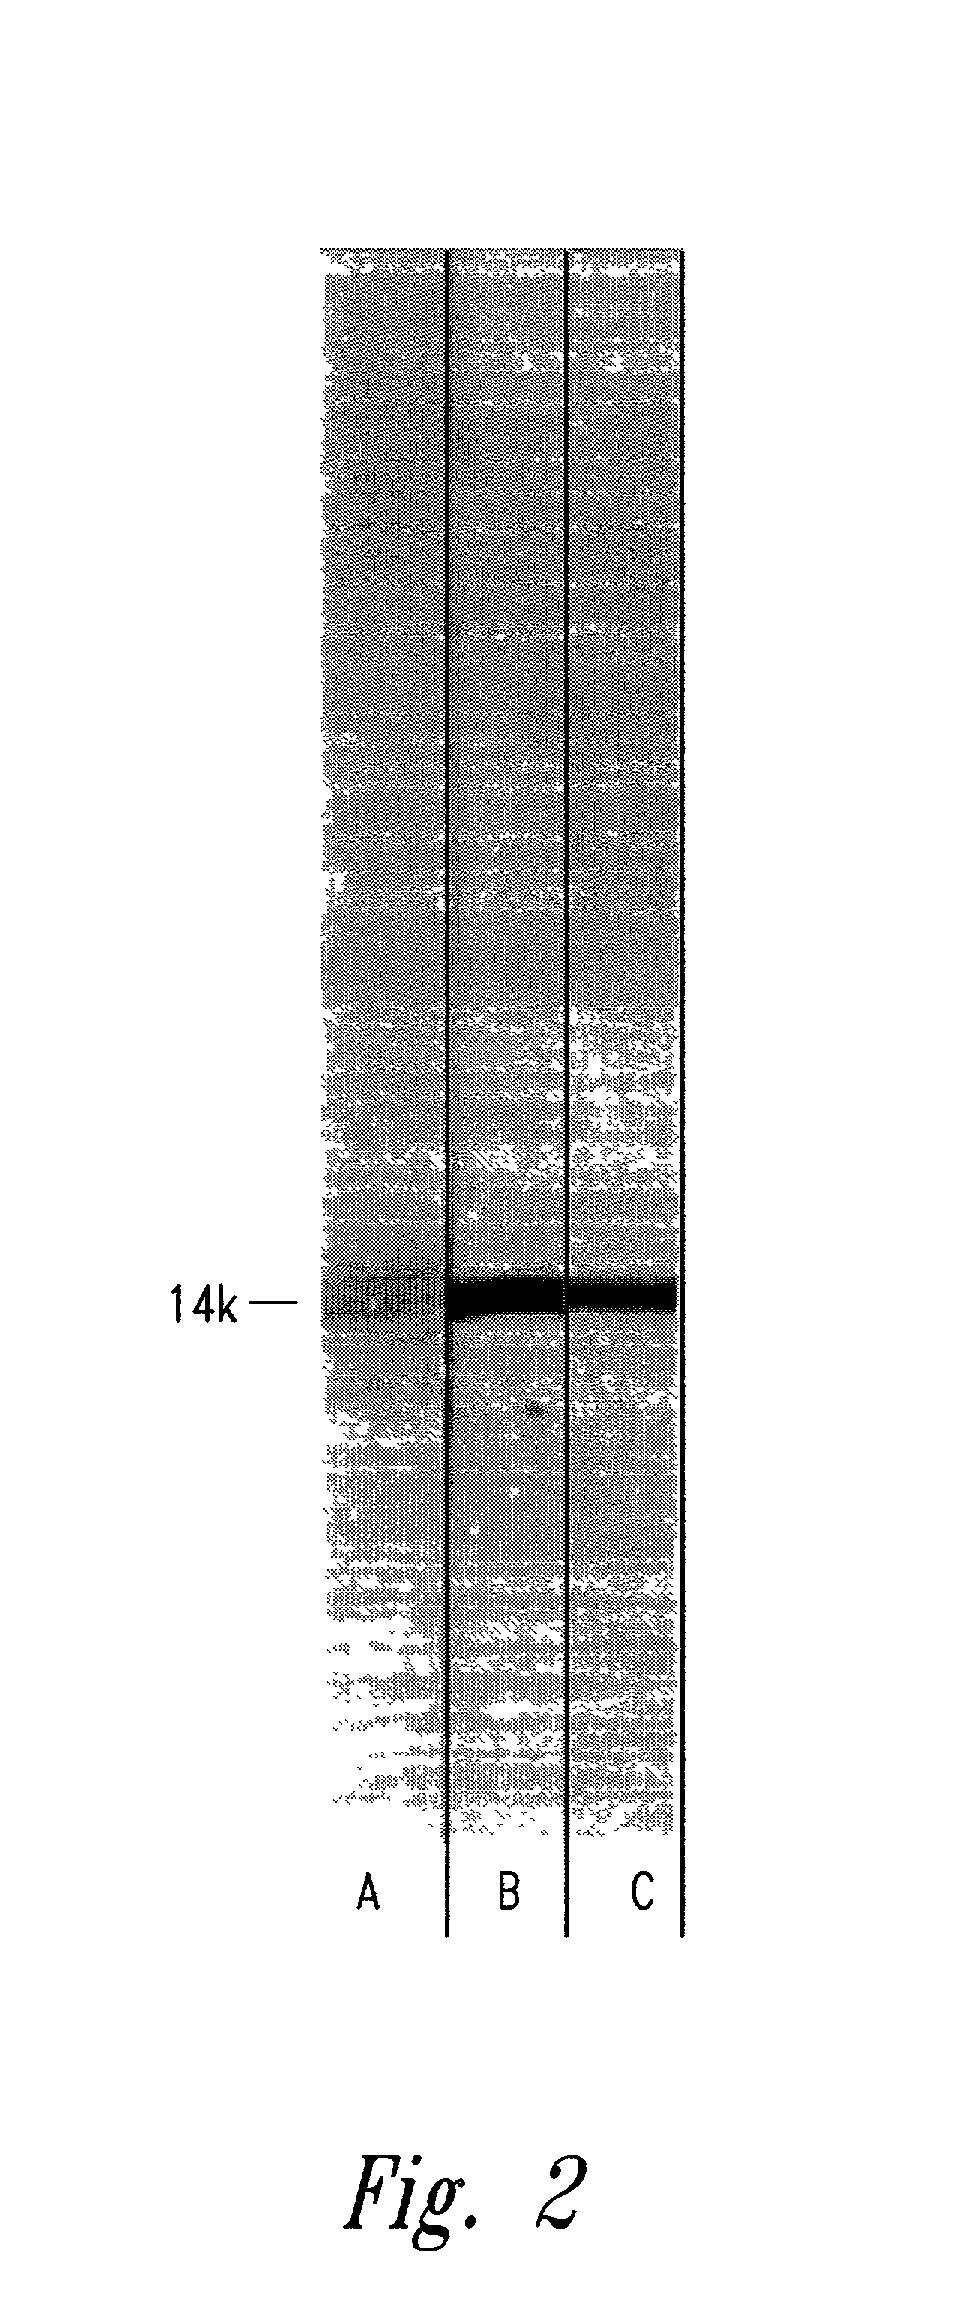 Antigen of hybrid M protein and carrier for group A streptococcal vaccine